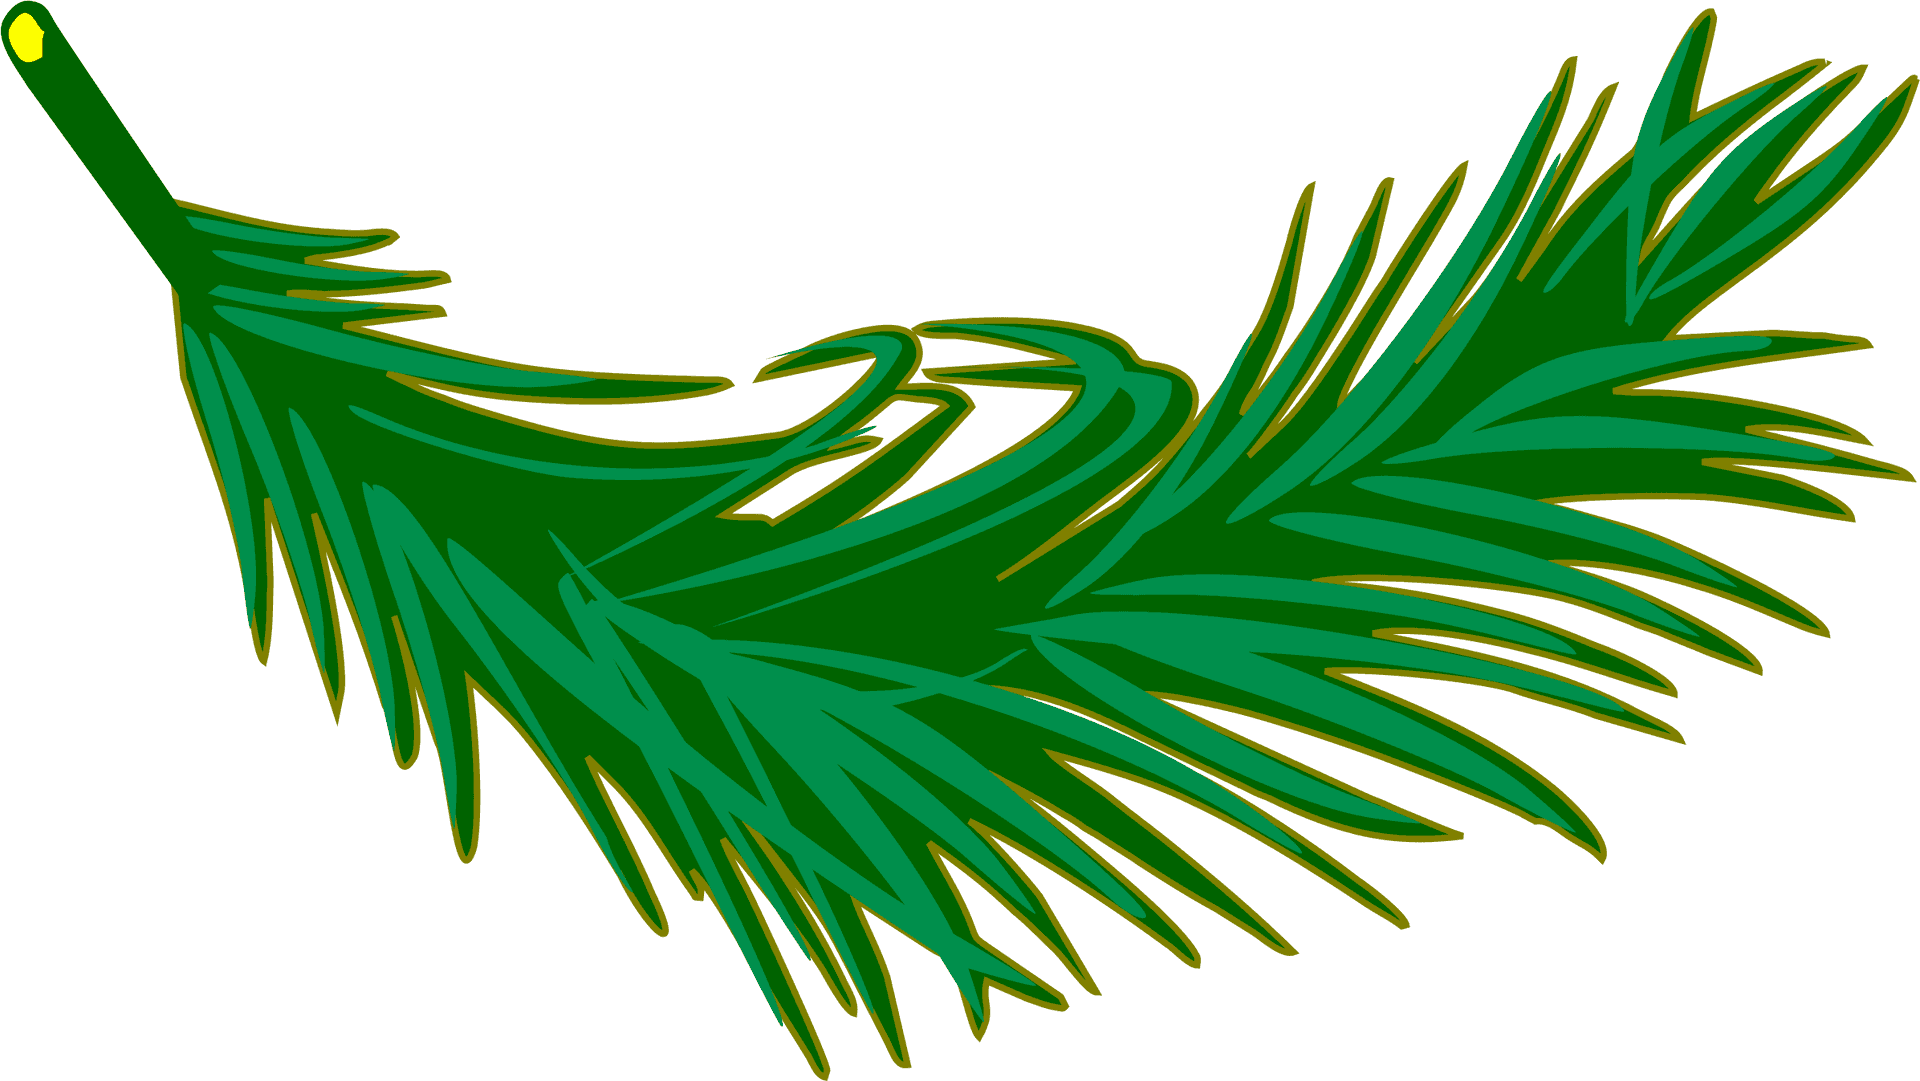 Green Palm Leaf Graphic PNG image